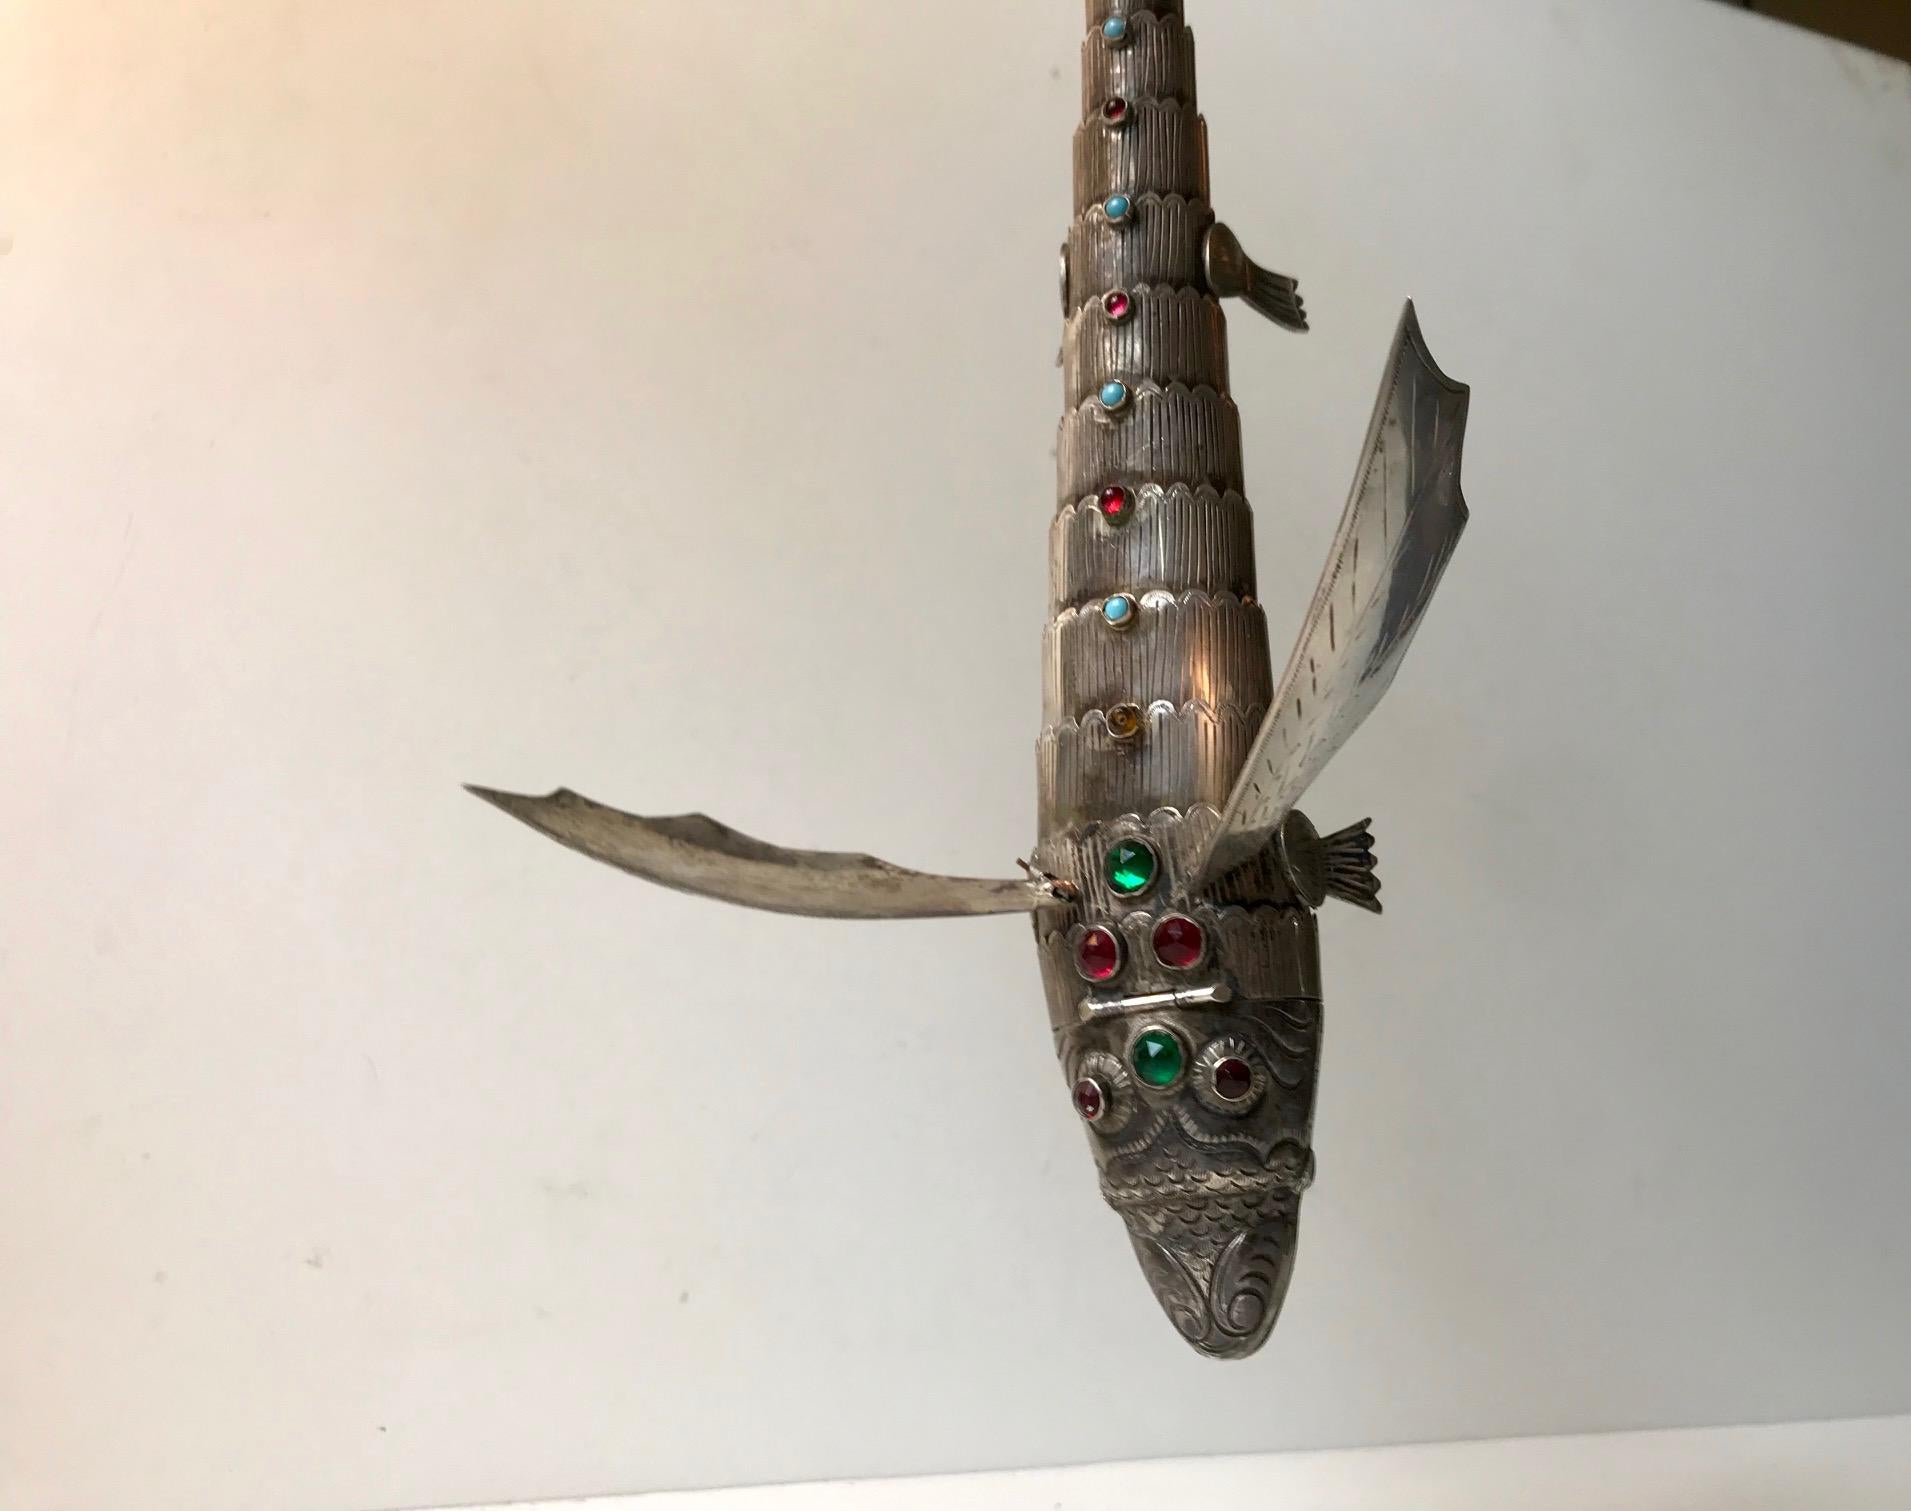 Large articulated Dragon detailed with hand engraved patterns, faceted glass beats and semi precious stones. The head is hinged to open as a secret box originally intended for storing opium or valuable spices. It is fully hallmarked and testet as